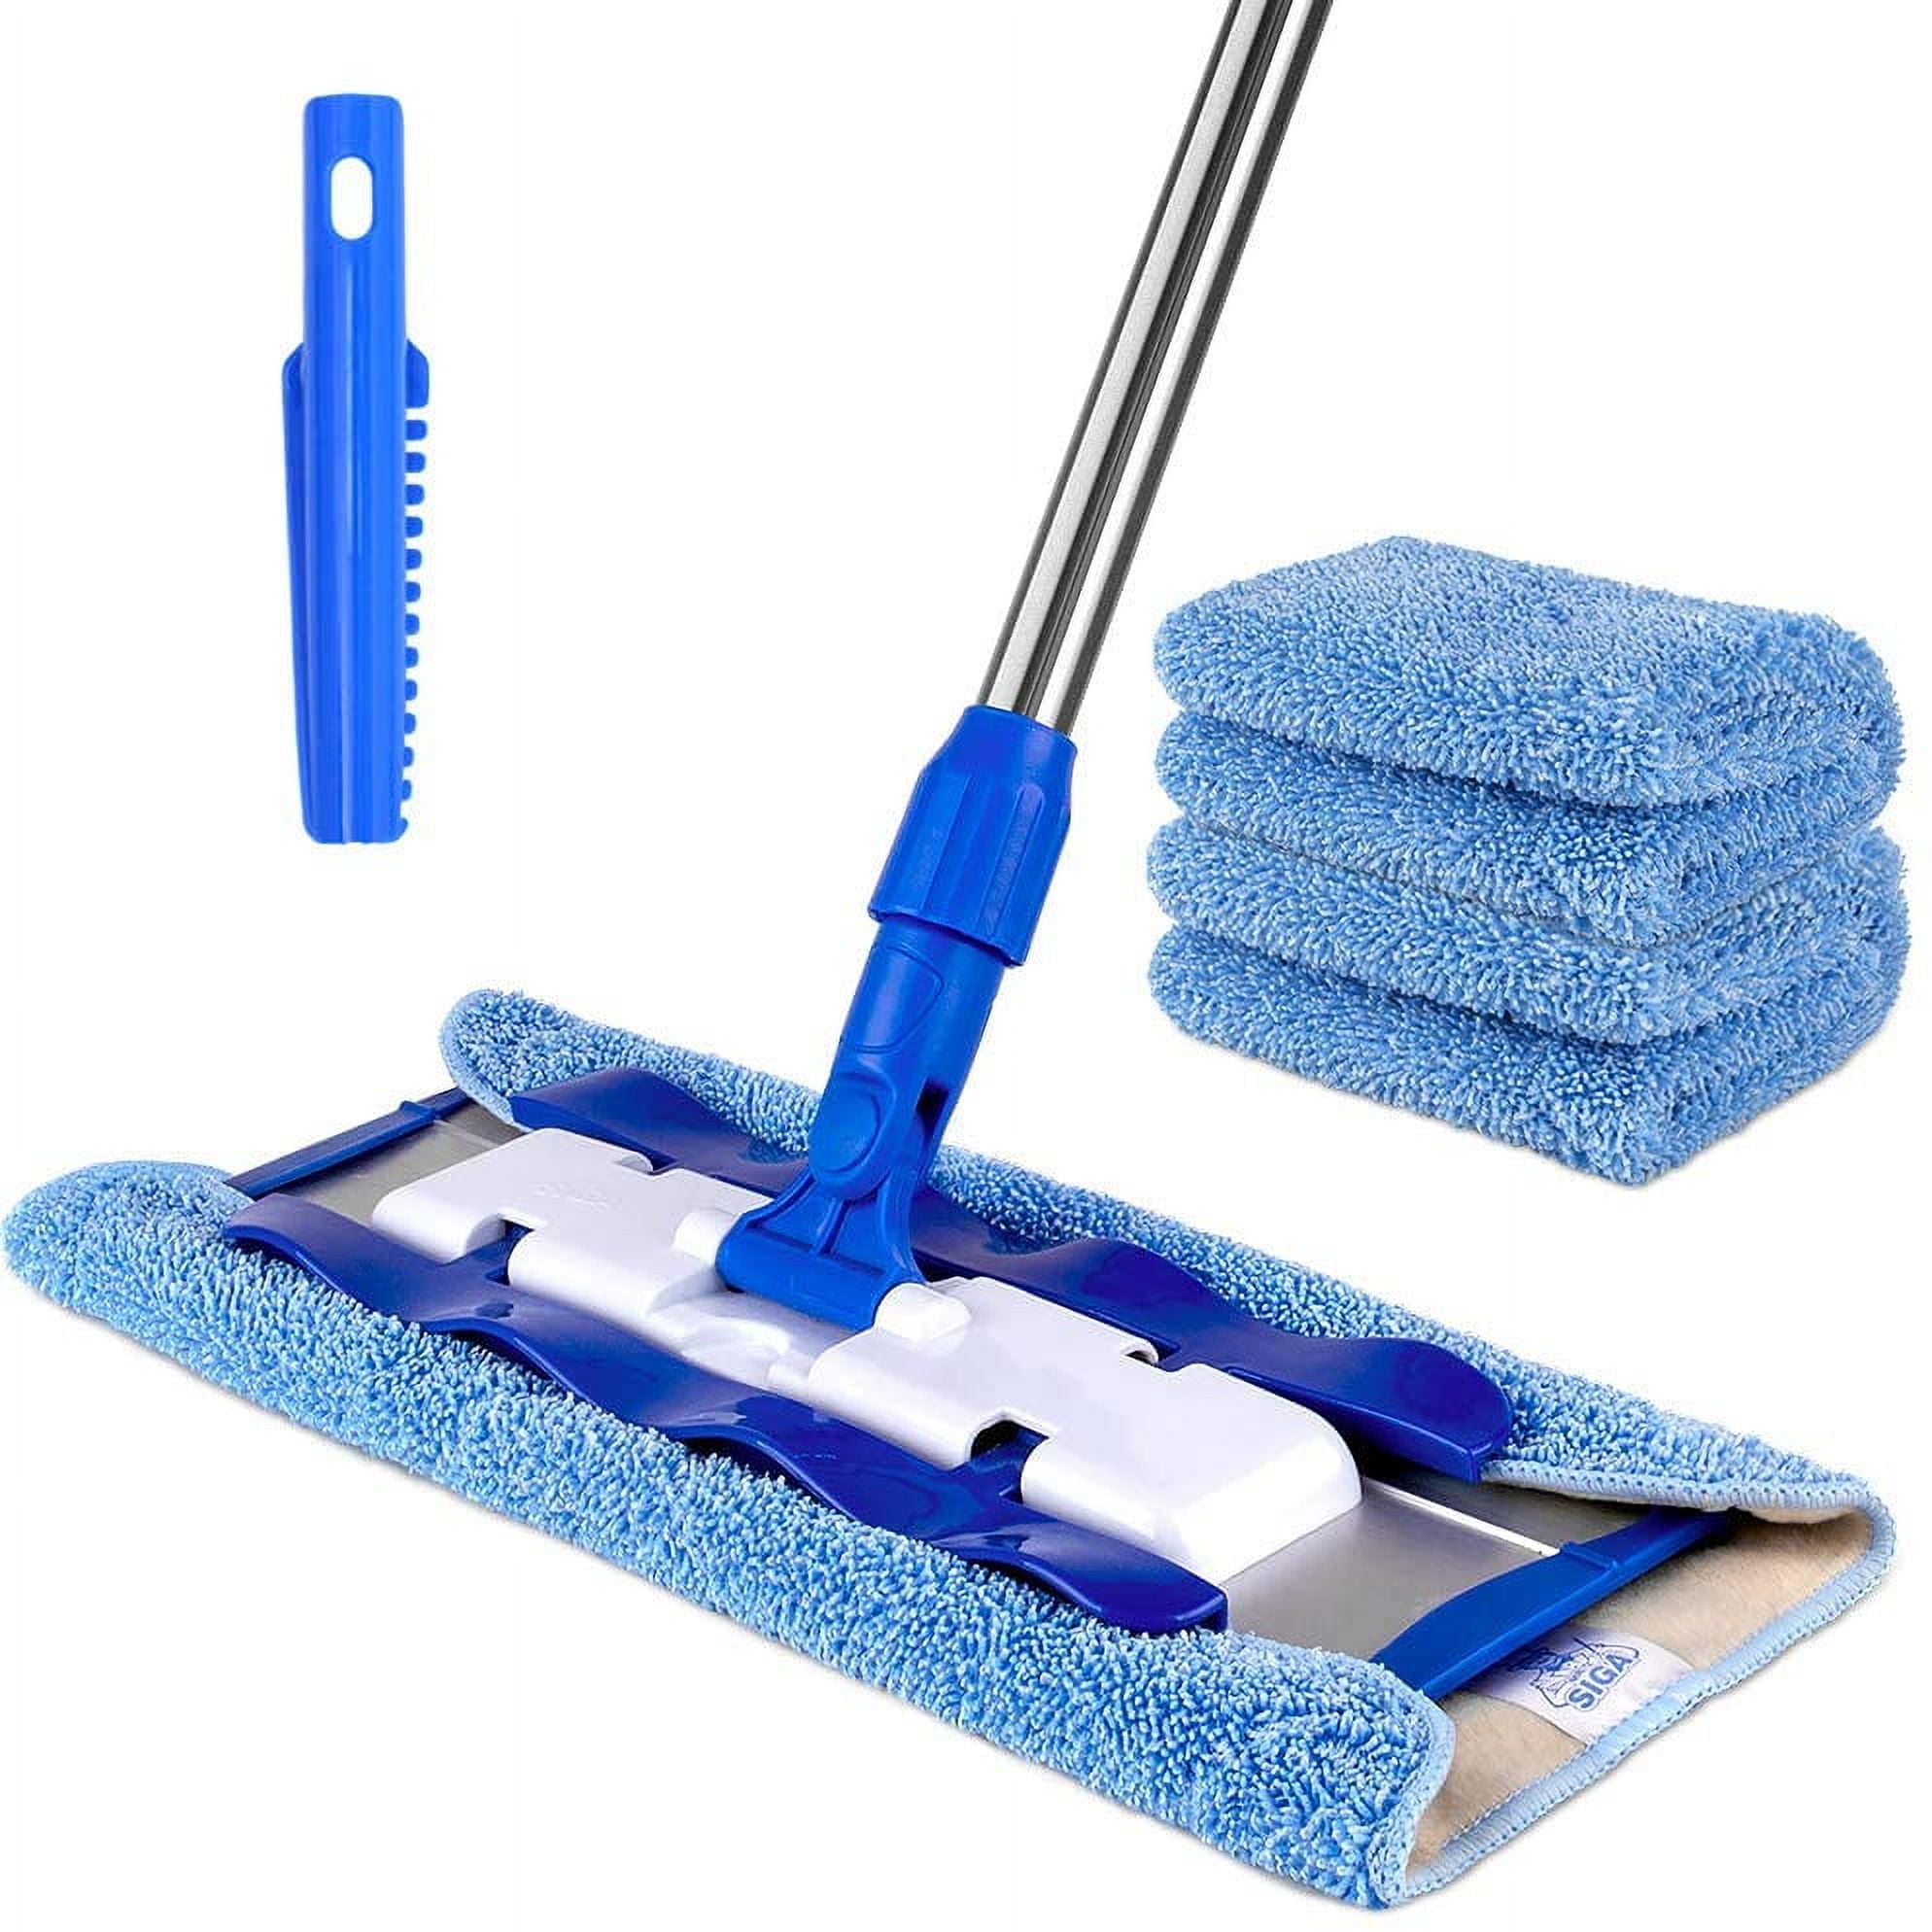 Microfiber Mops  Best Mop for Hardwood Floors Tagged mops - E-Cloth Inc